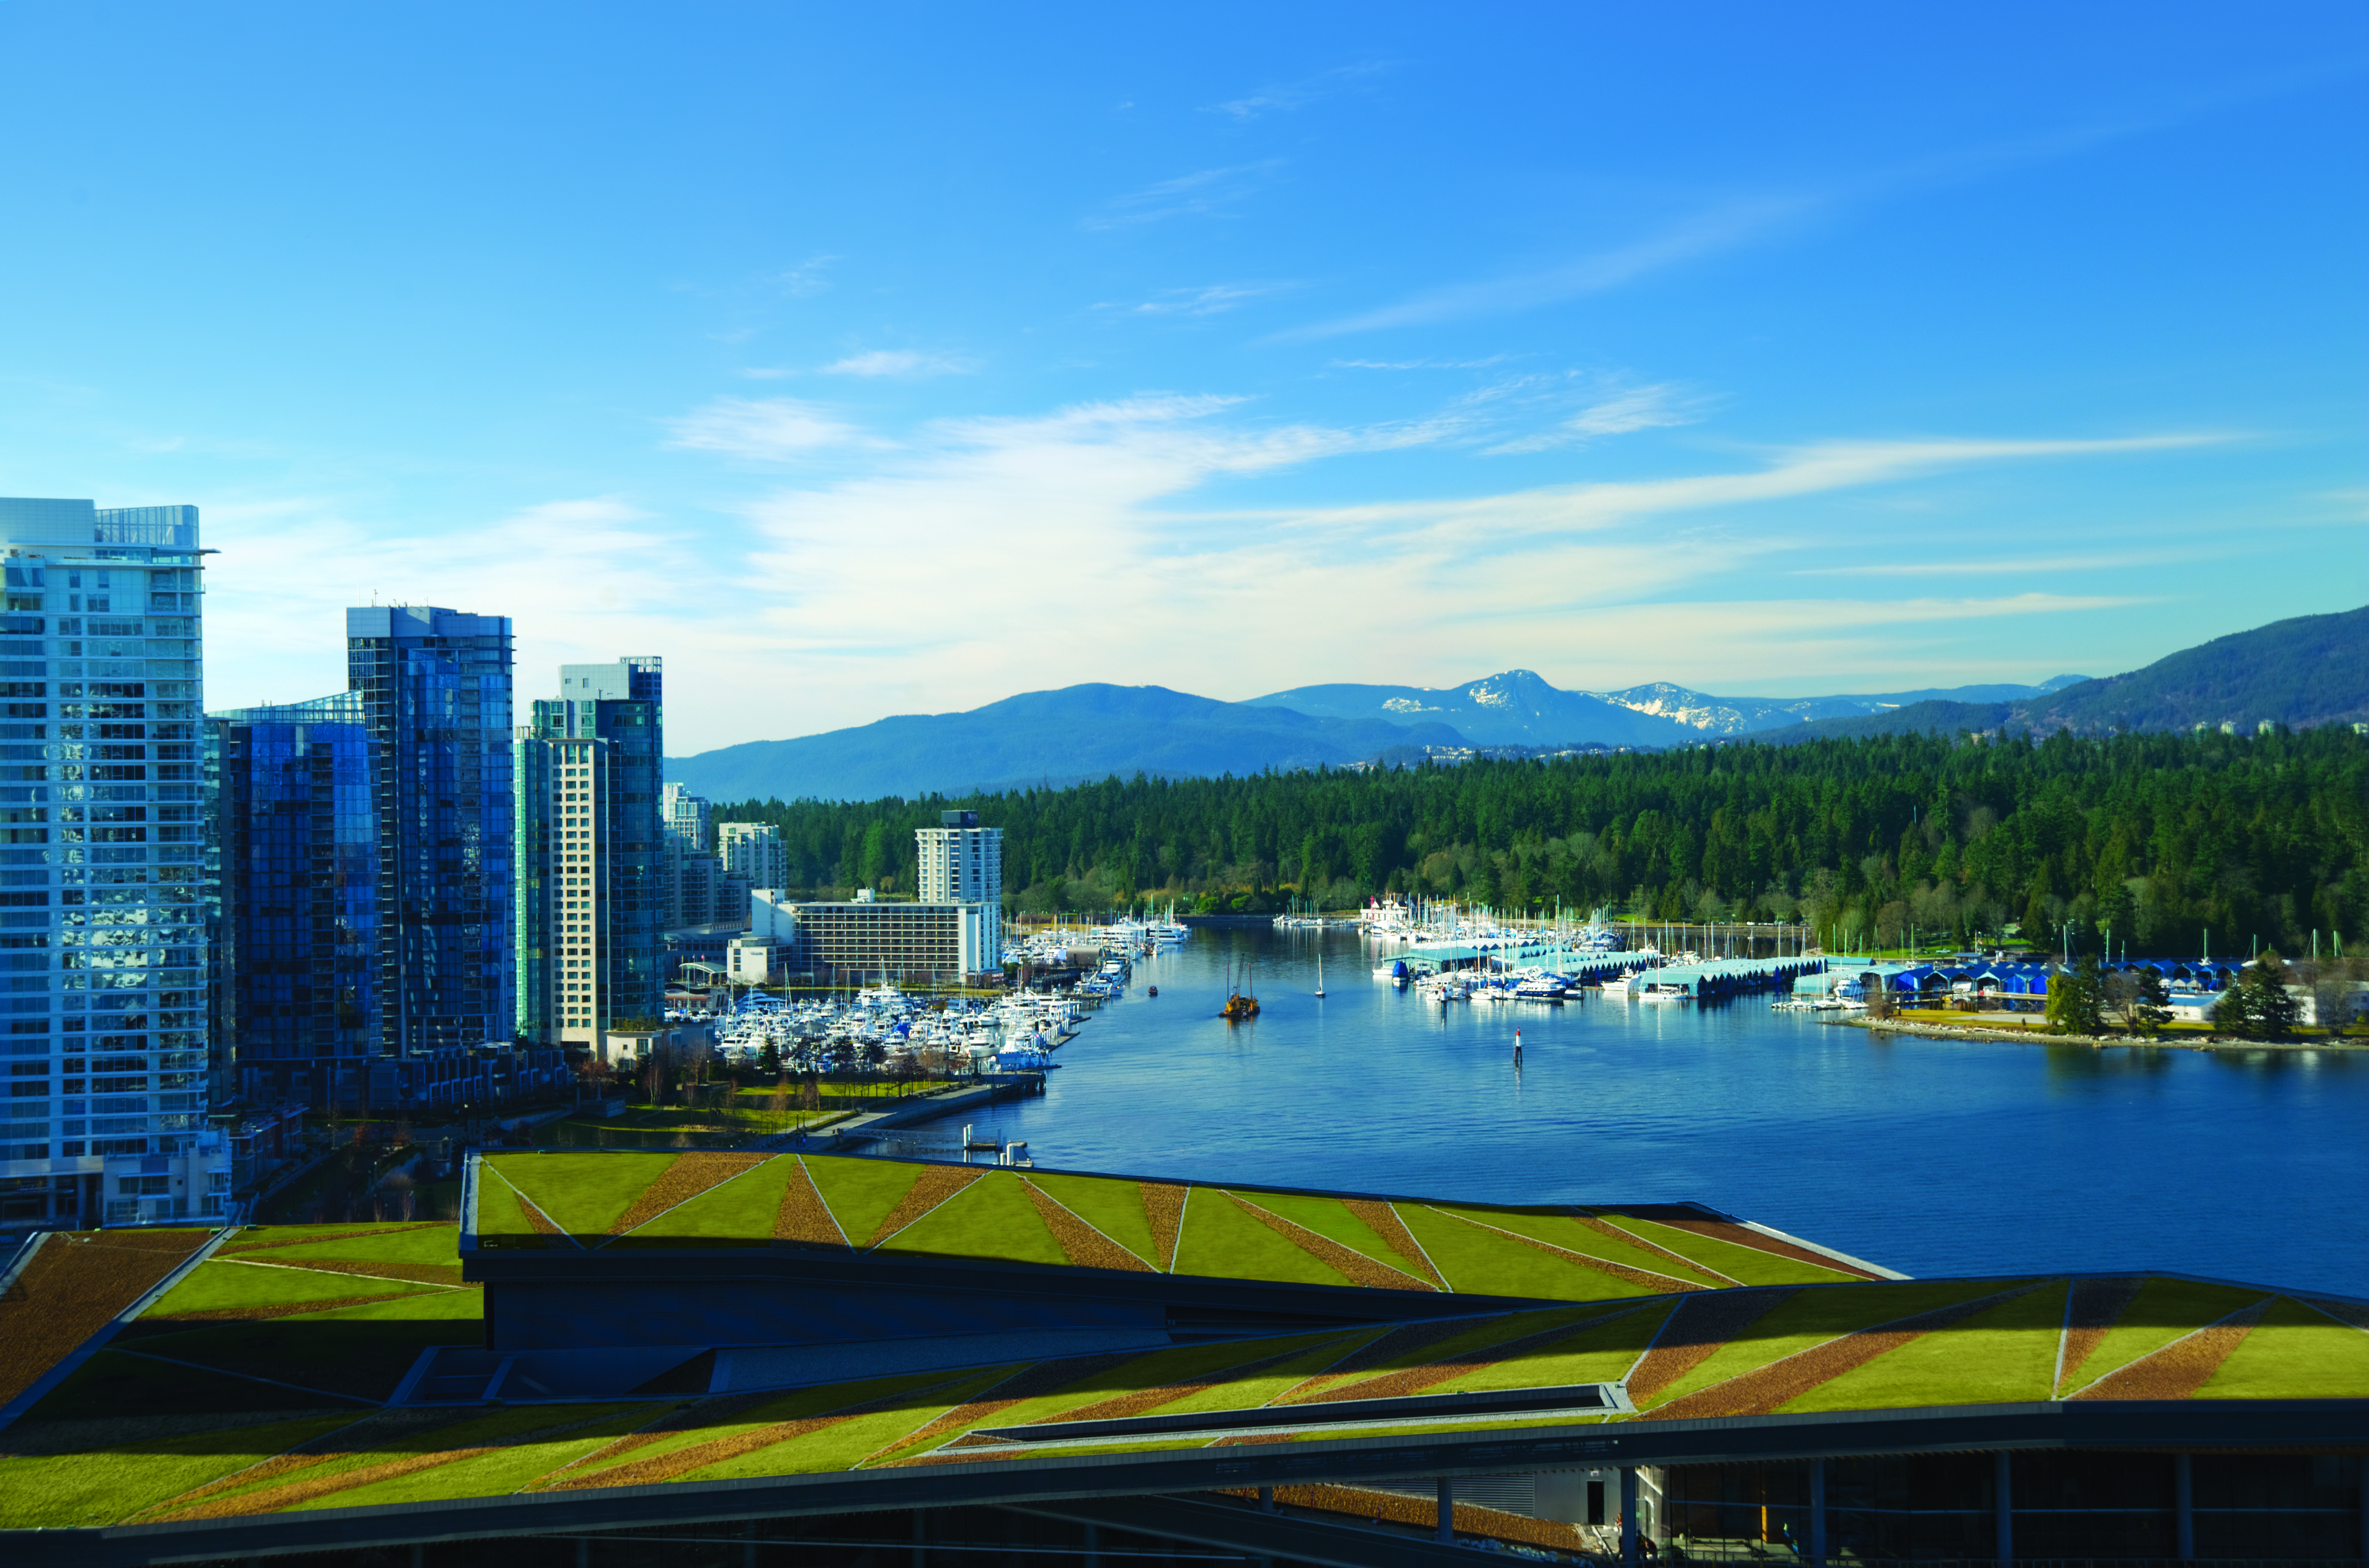 Green Roof, Vancouver Convention Centre (Photo: Vancouver Convention Centre / Flickr)